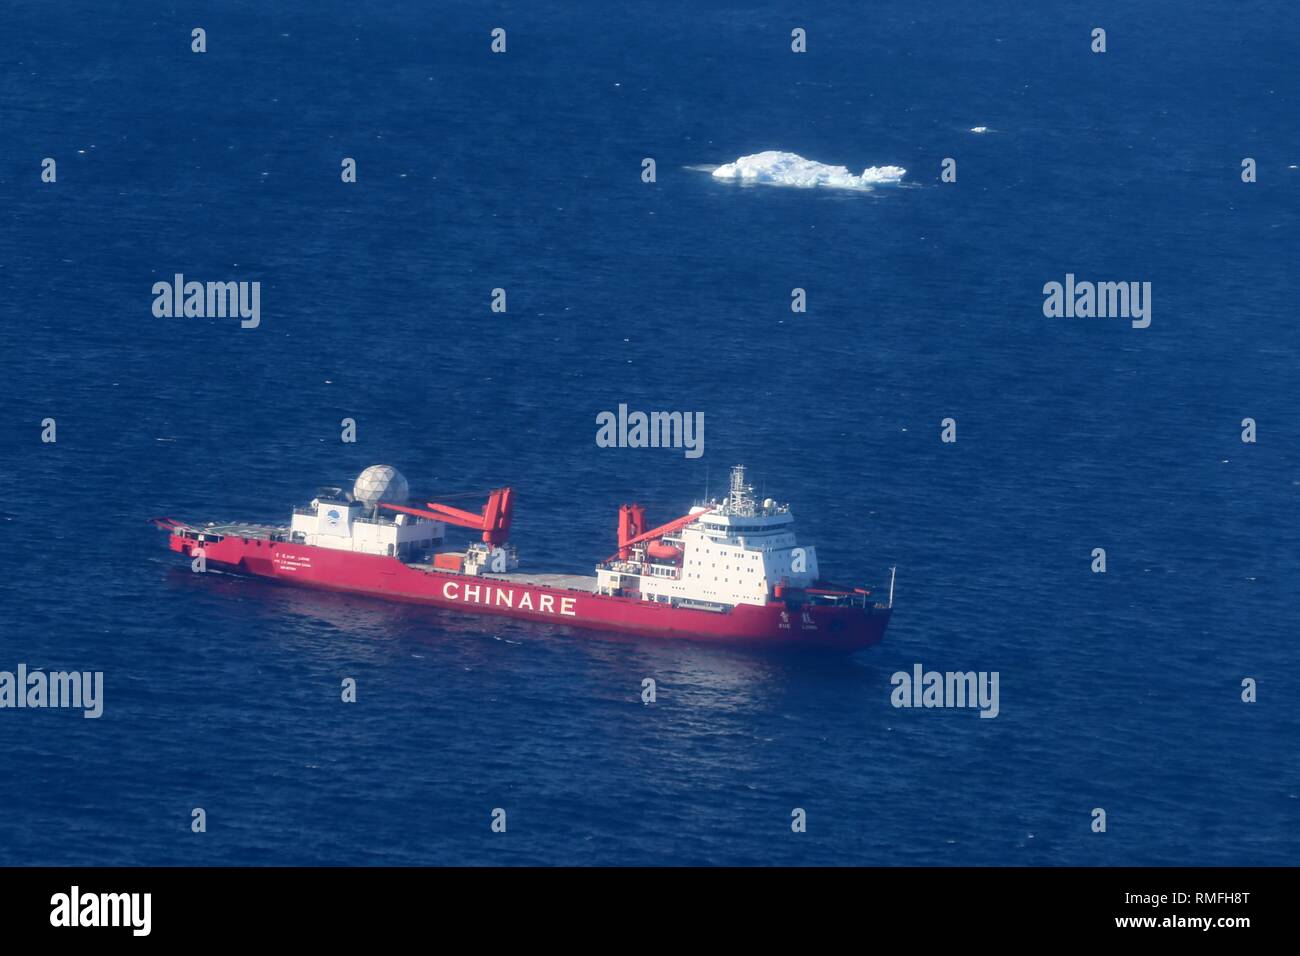 Aboard Xuelong. 14th Feb, 2019. China's research icebreaker Xuelong is seen near the Zhongshan Station, Feb. 14, 2019. China's research icebreaker Xuelong, with 126 crew members aboard on the 35th Antarctic research mission, on Thursday local time left the Zhongshan Station on its way back to China. Snow Eagle 601, China's first fixed-wing aircraft for polar flight, on Thursday night also departed from the Antarctic after completing all assignments. Credit: Liu Shiping/Xinhua/Alamy Live News Stock Photo